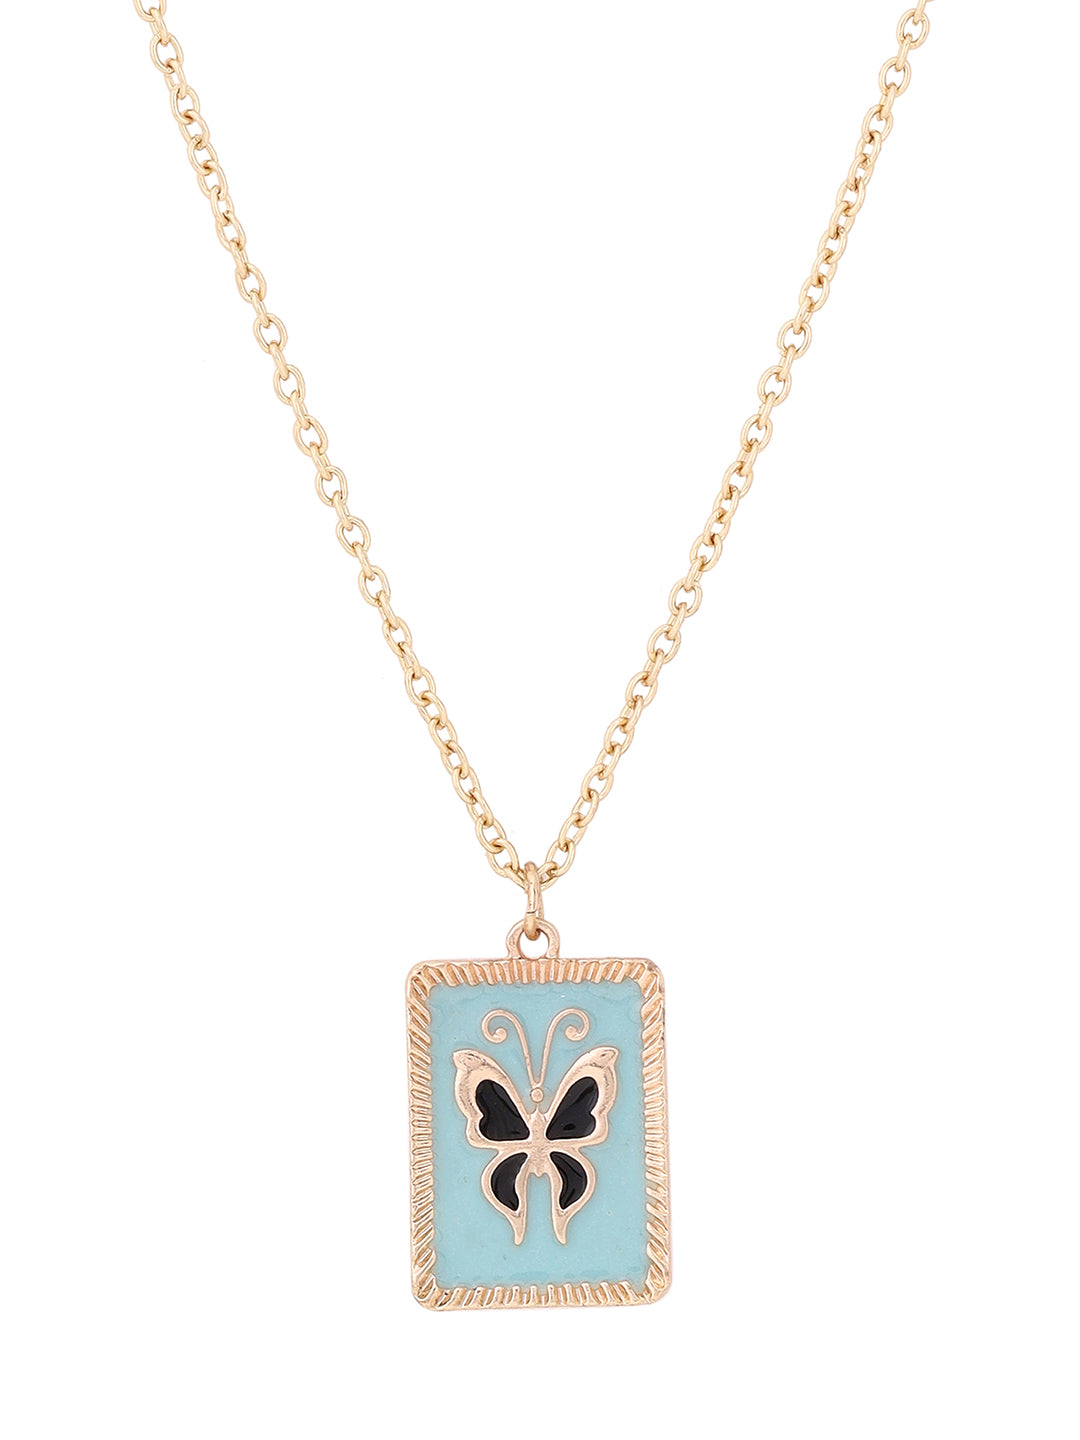 Priyaasi Blue Butterfly Pendant Gold Plated Necklace